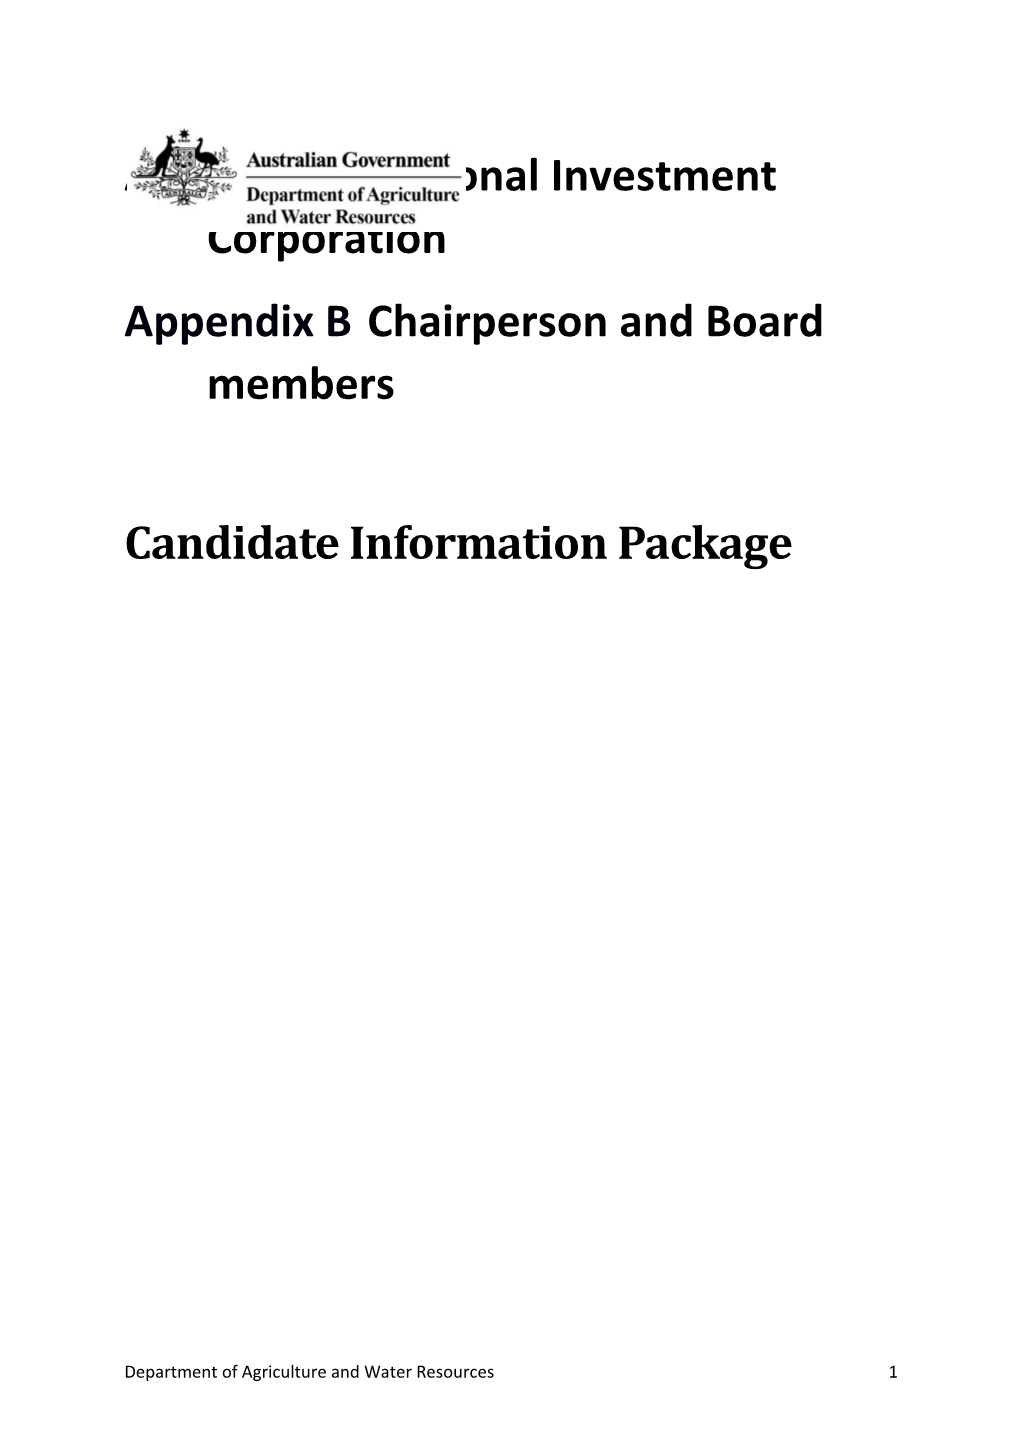 Regional Investment Corporation Chairperson and Board Members - Candidate Information Package